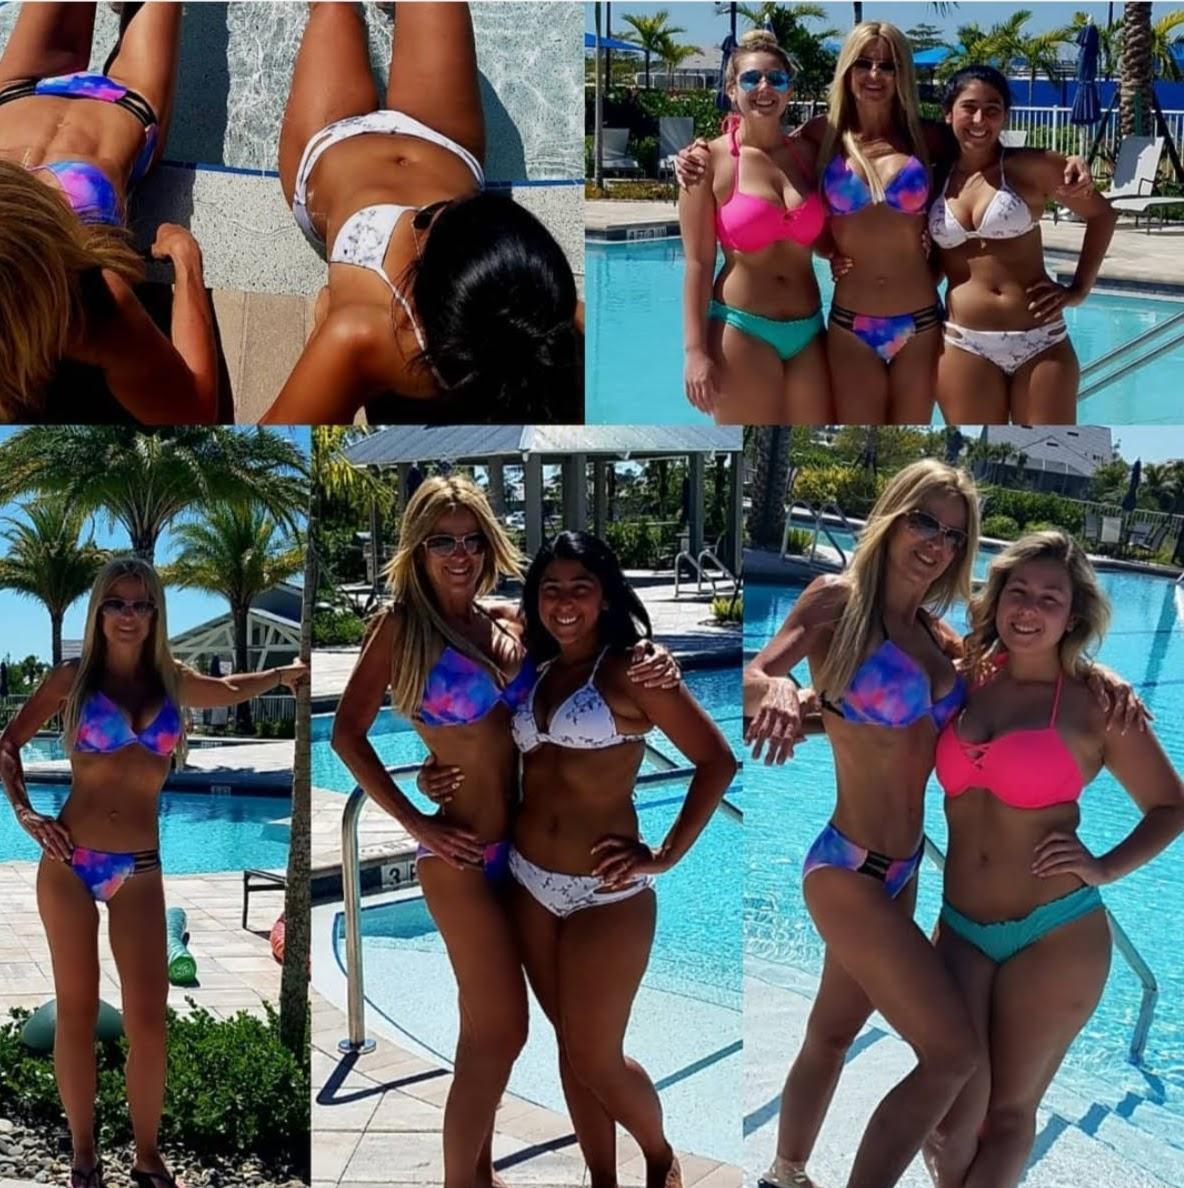 Mom and her 2 daughters bikini collage